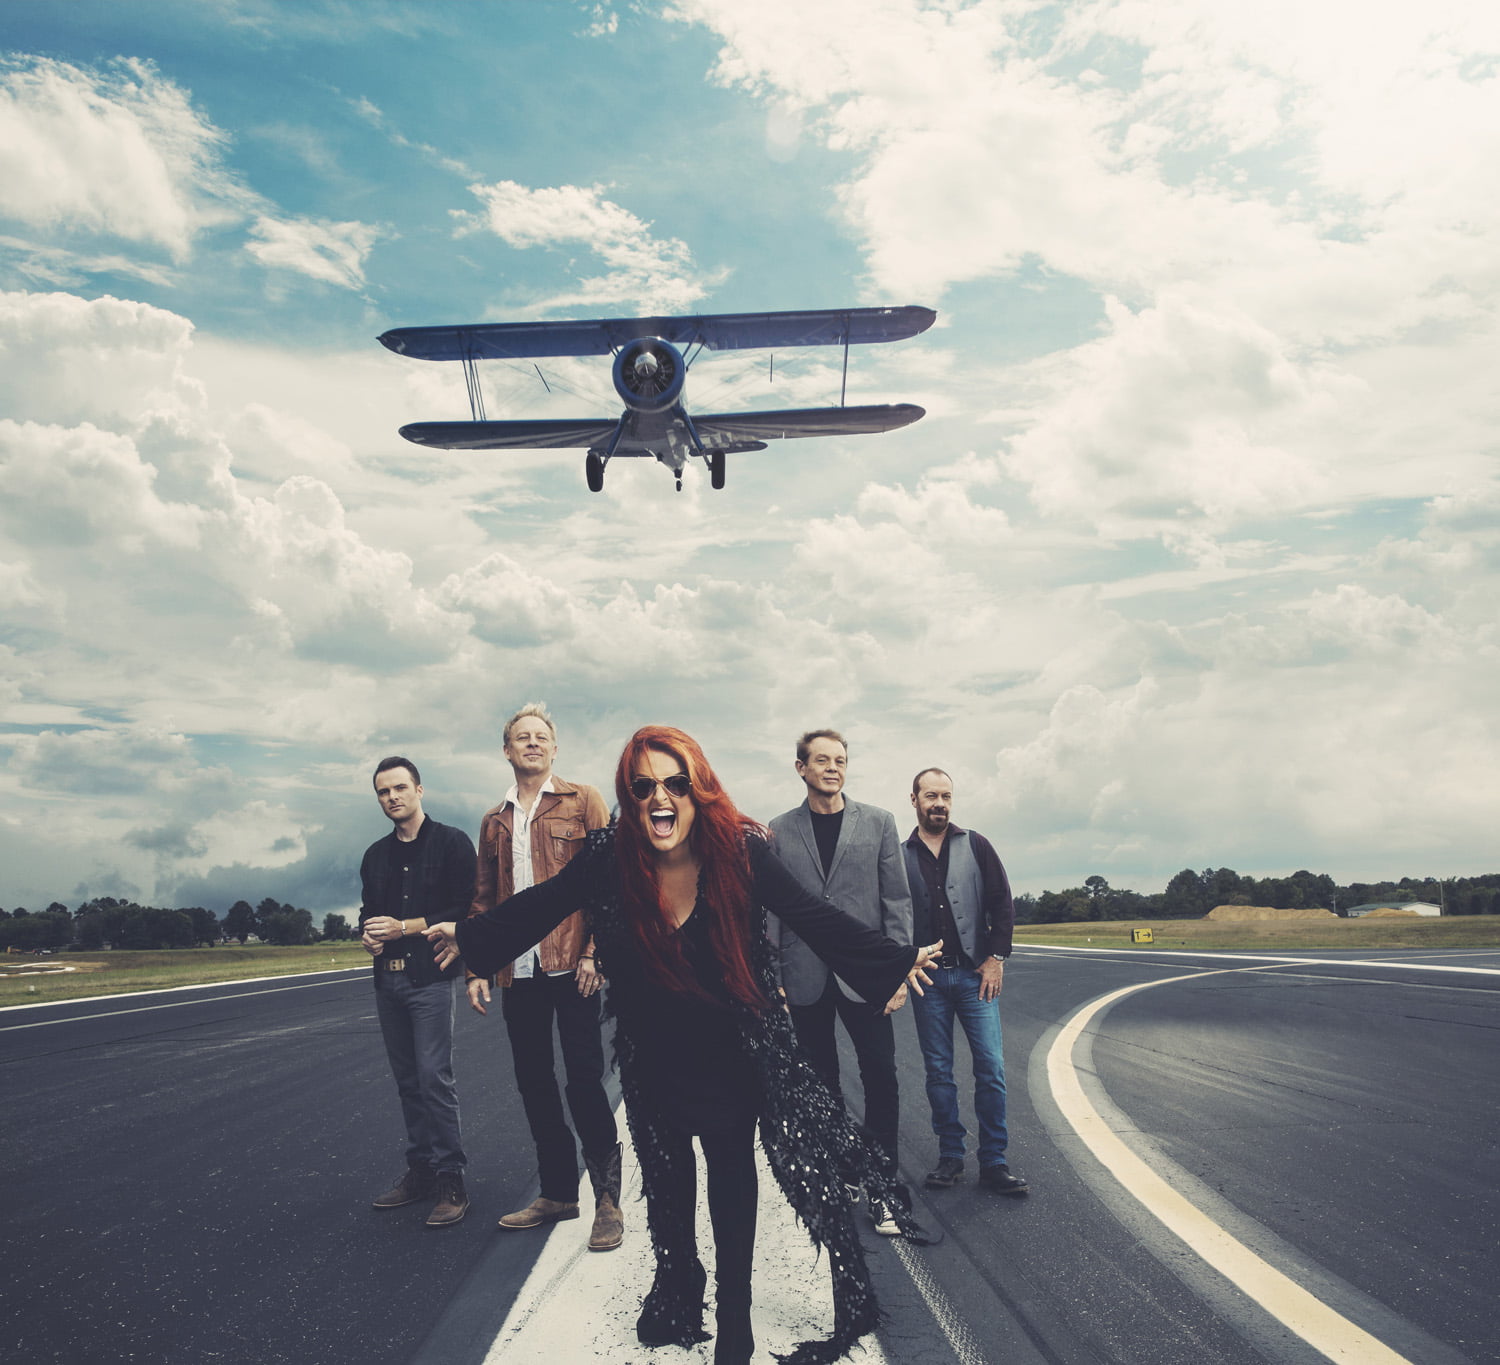 Restoration and Revival: An Interview with Wynonna Judd